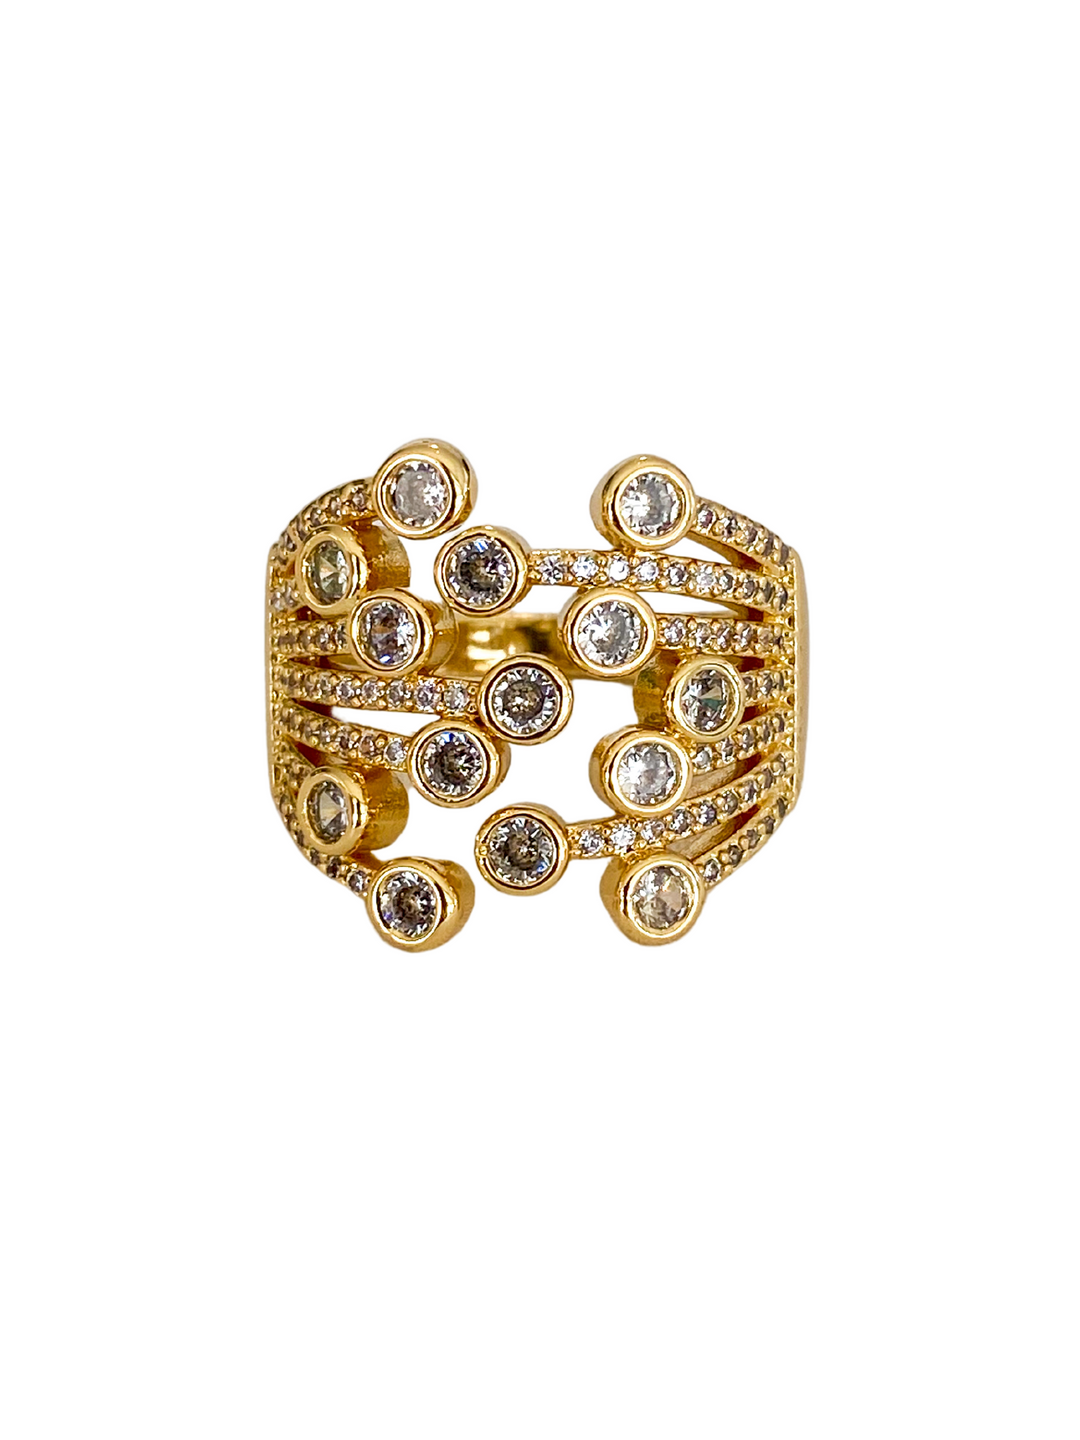 18K Gold Plated Ariadna Ring